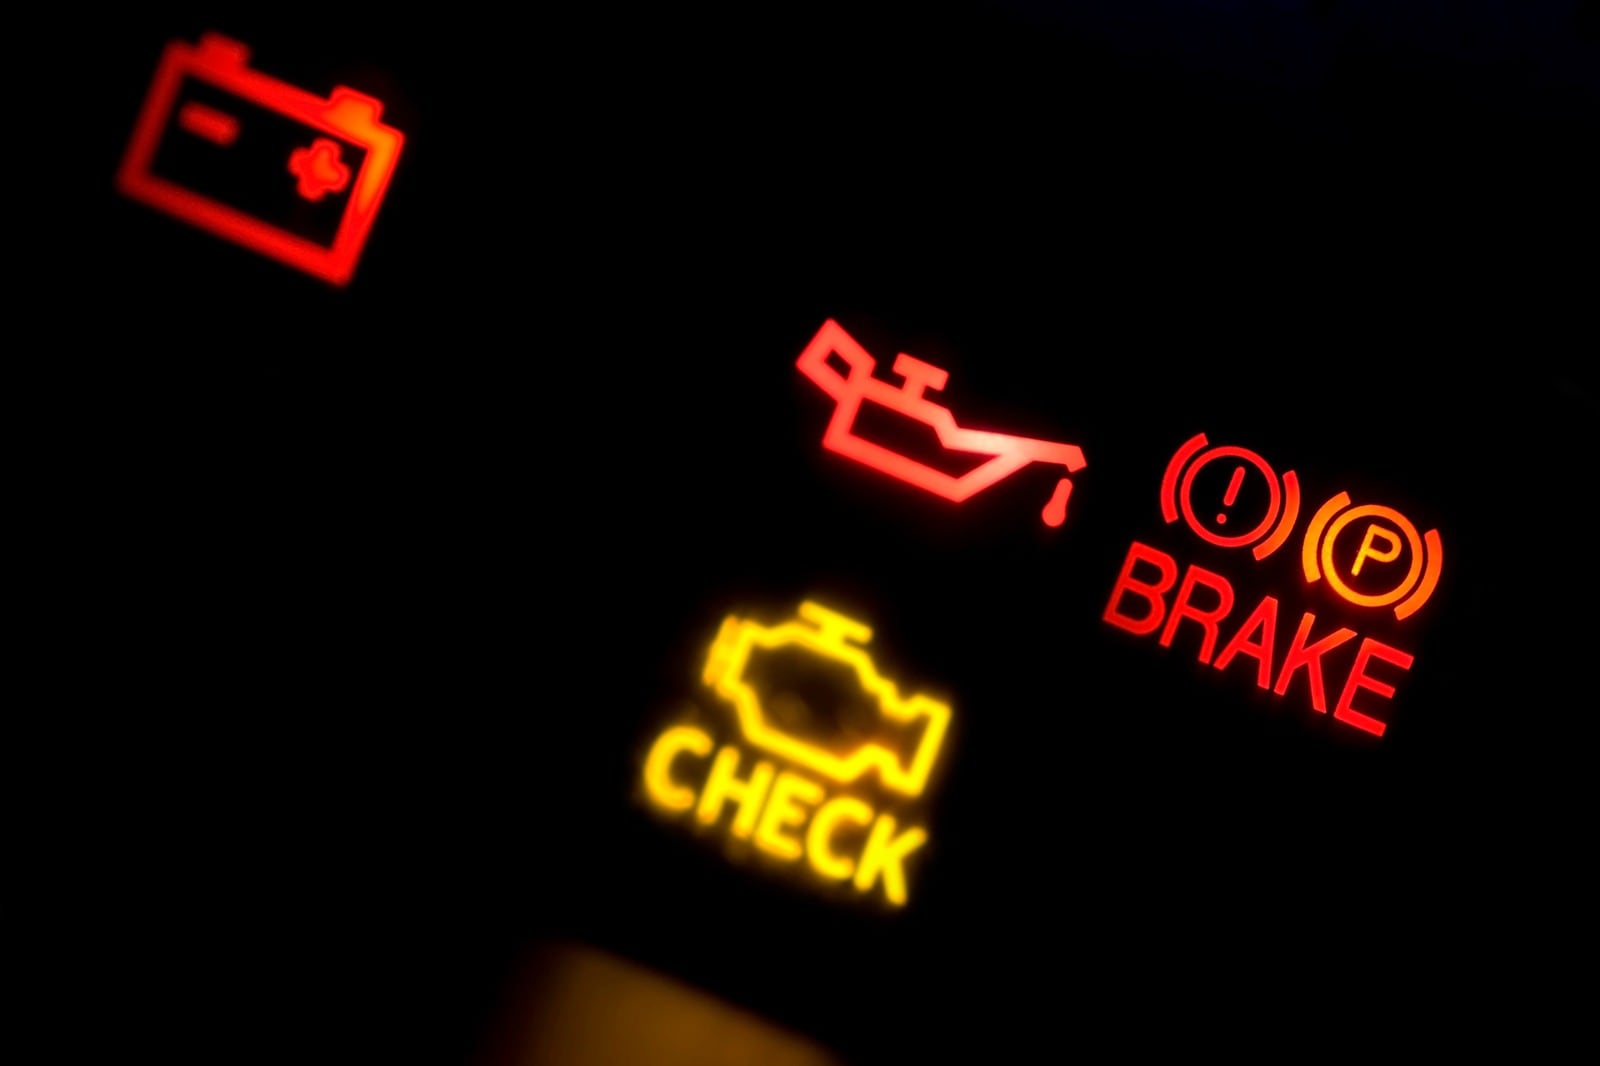 Will Check Engine Light Come On for Oil Change? Understanding Your Car's Alerts